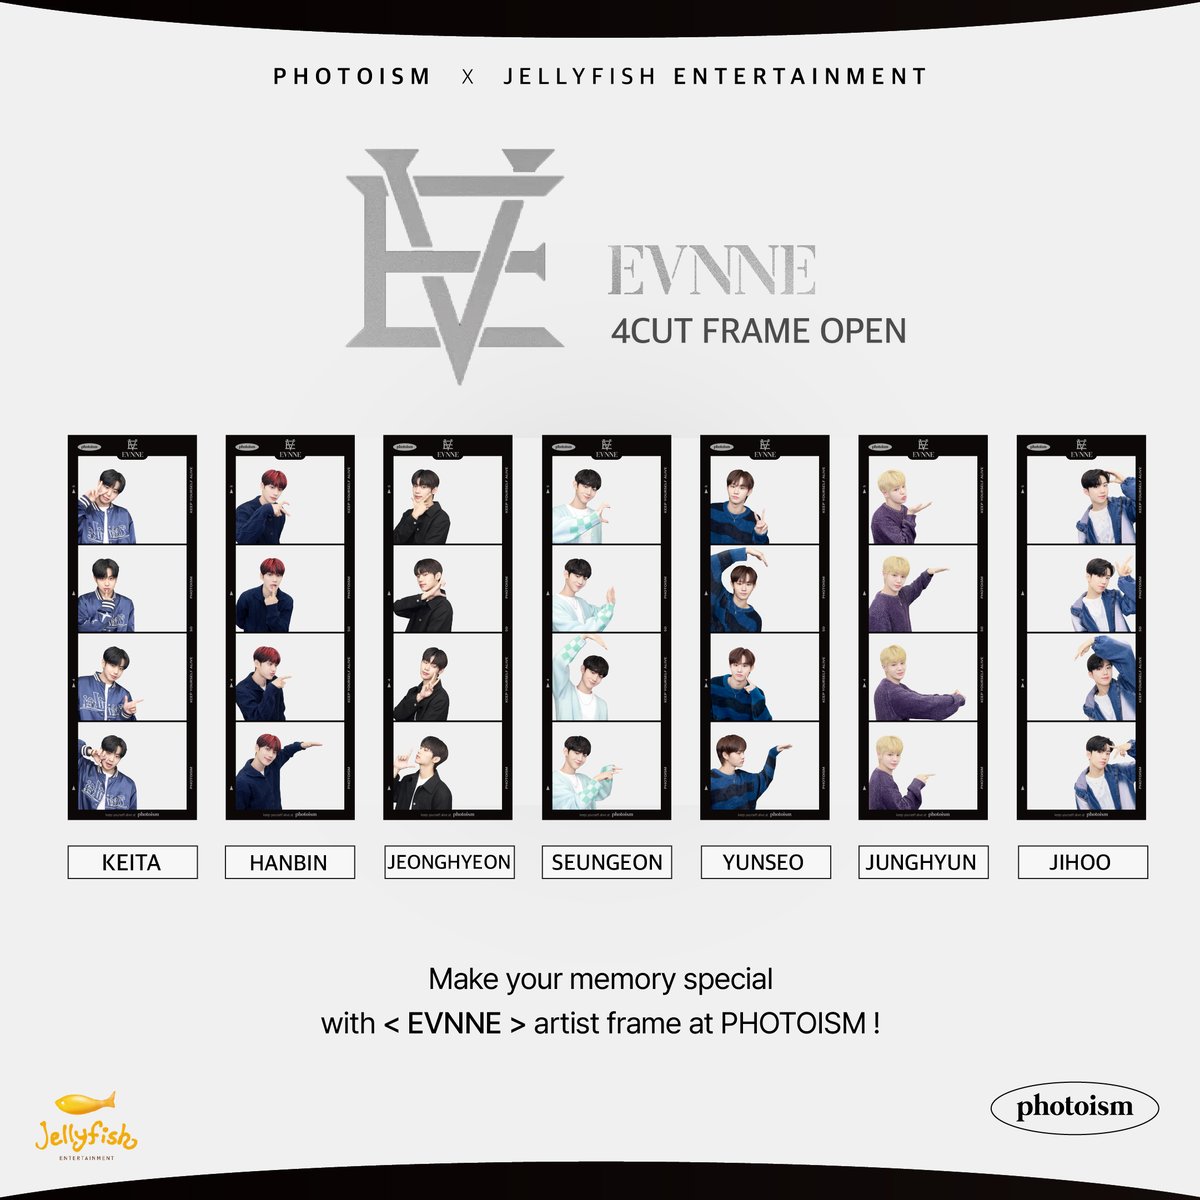 PHOTOISM X EVNNE ARTIST FRAME RELEASE The <EVNNE> artist frame has been released on photoism. Take photos and make special memories with the <EVNNE>photo frame at all photoism stores. ▪ PERIOD | Apr 19 – May 16 (KST) Keep yourself alive at PHOTOISM